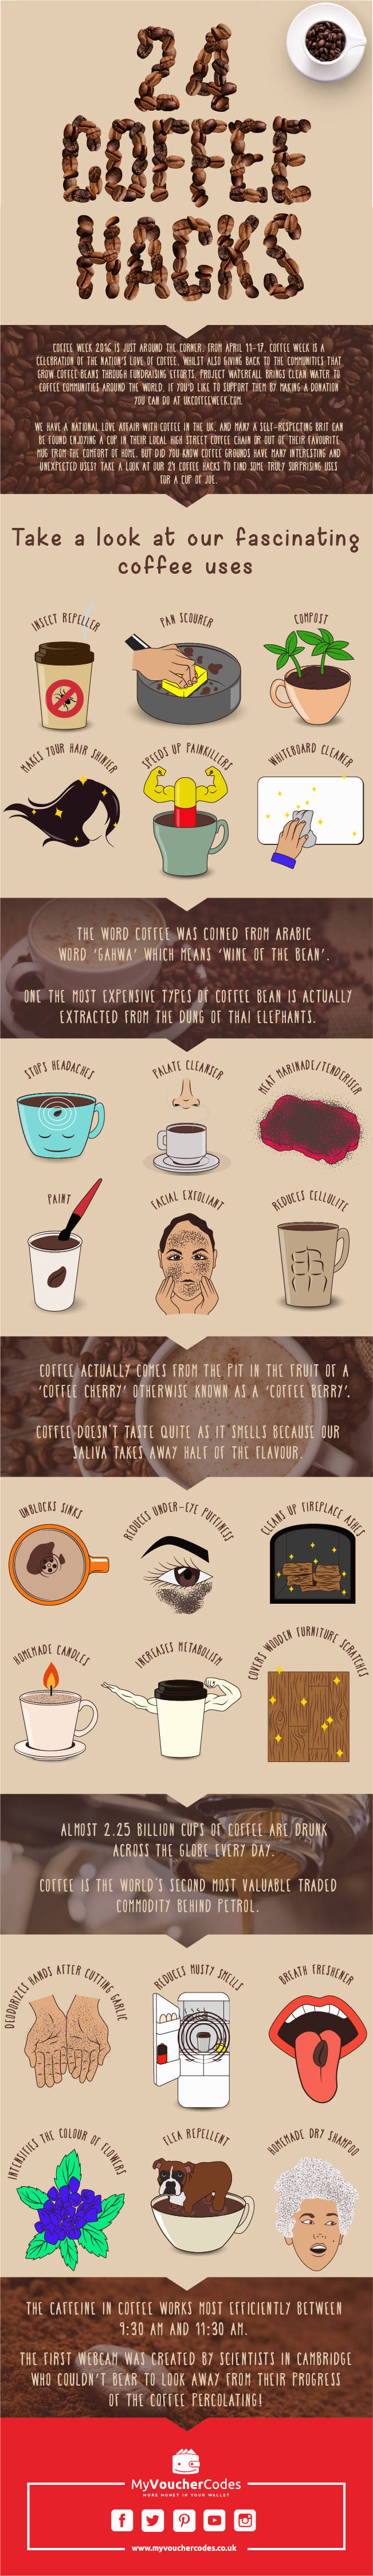 24 Unexpected Ways to Use Coffee Infographic